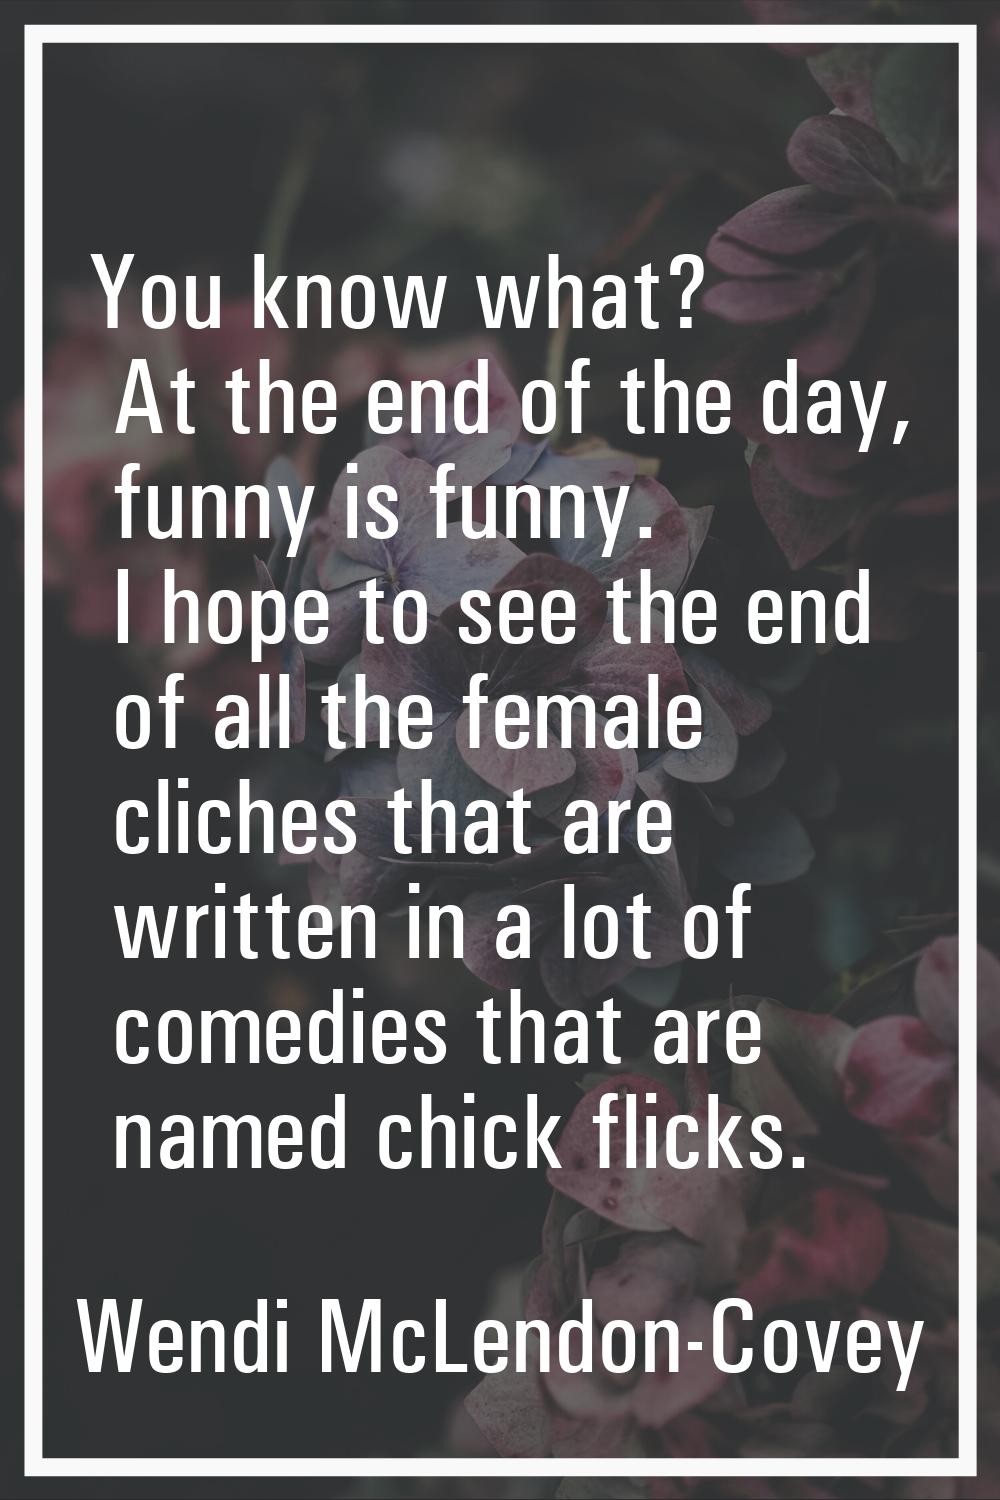 You know what? At the end of the day, funny is funny. I hope to see the end of all the female clich